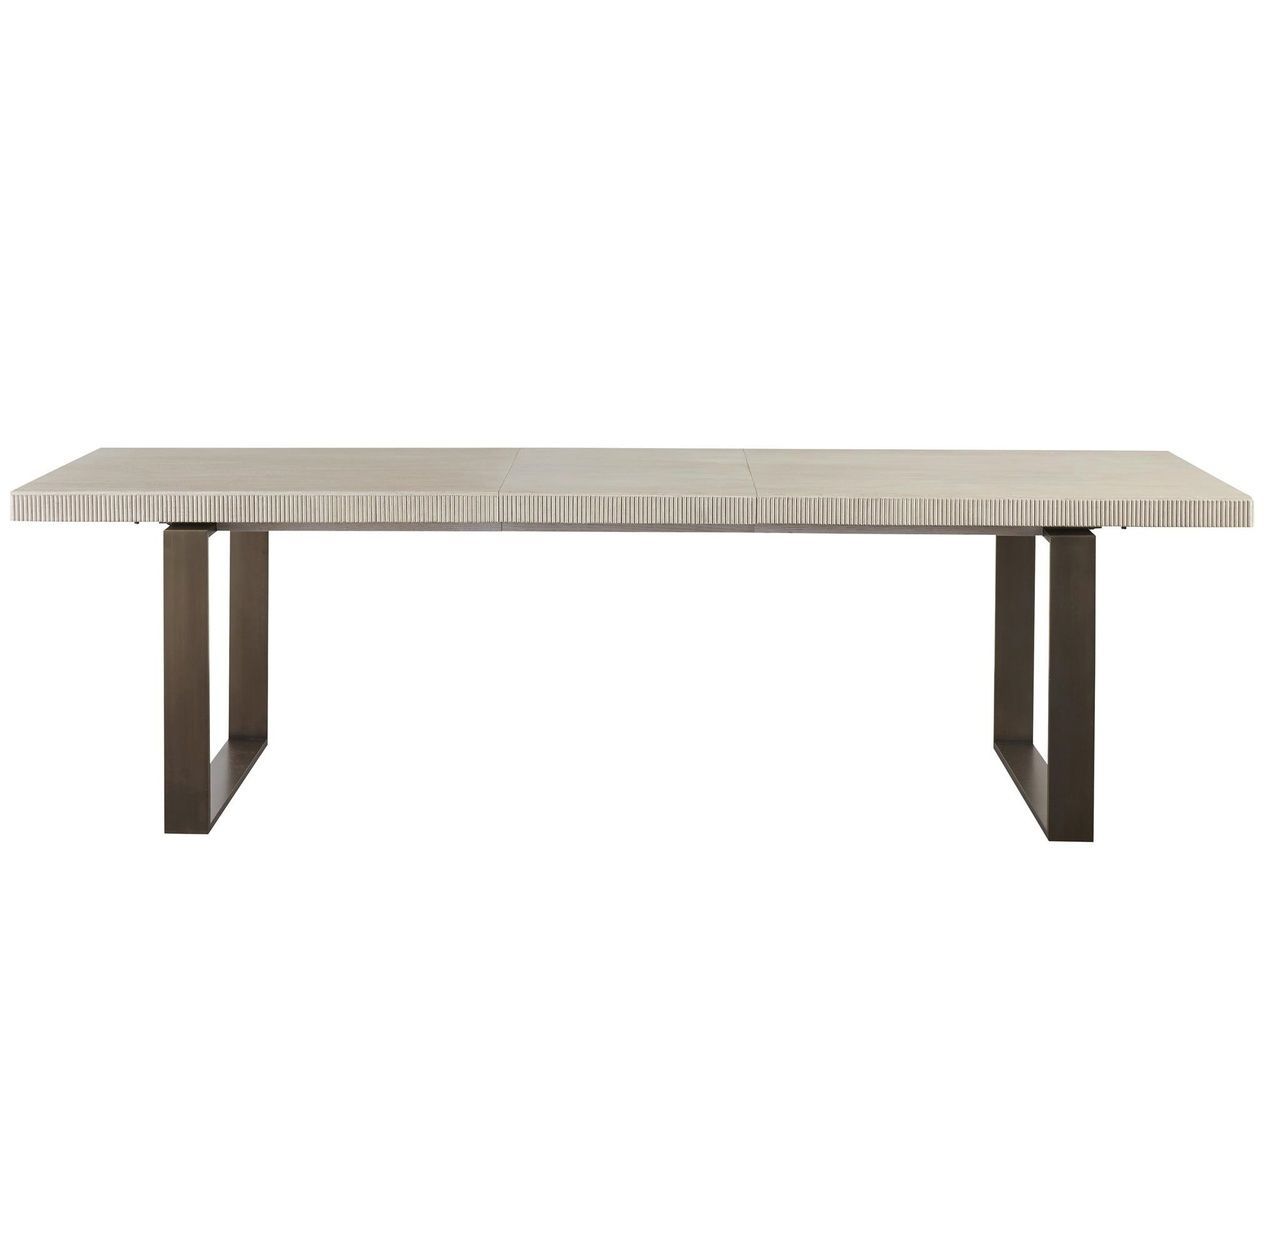 Modern Oak Wood + Bronze Metal Leg Extending Dining Table In Pertaining To Current Bismark Dining Tables (View 4 of 25)